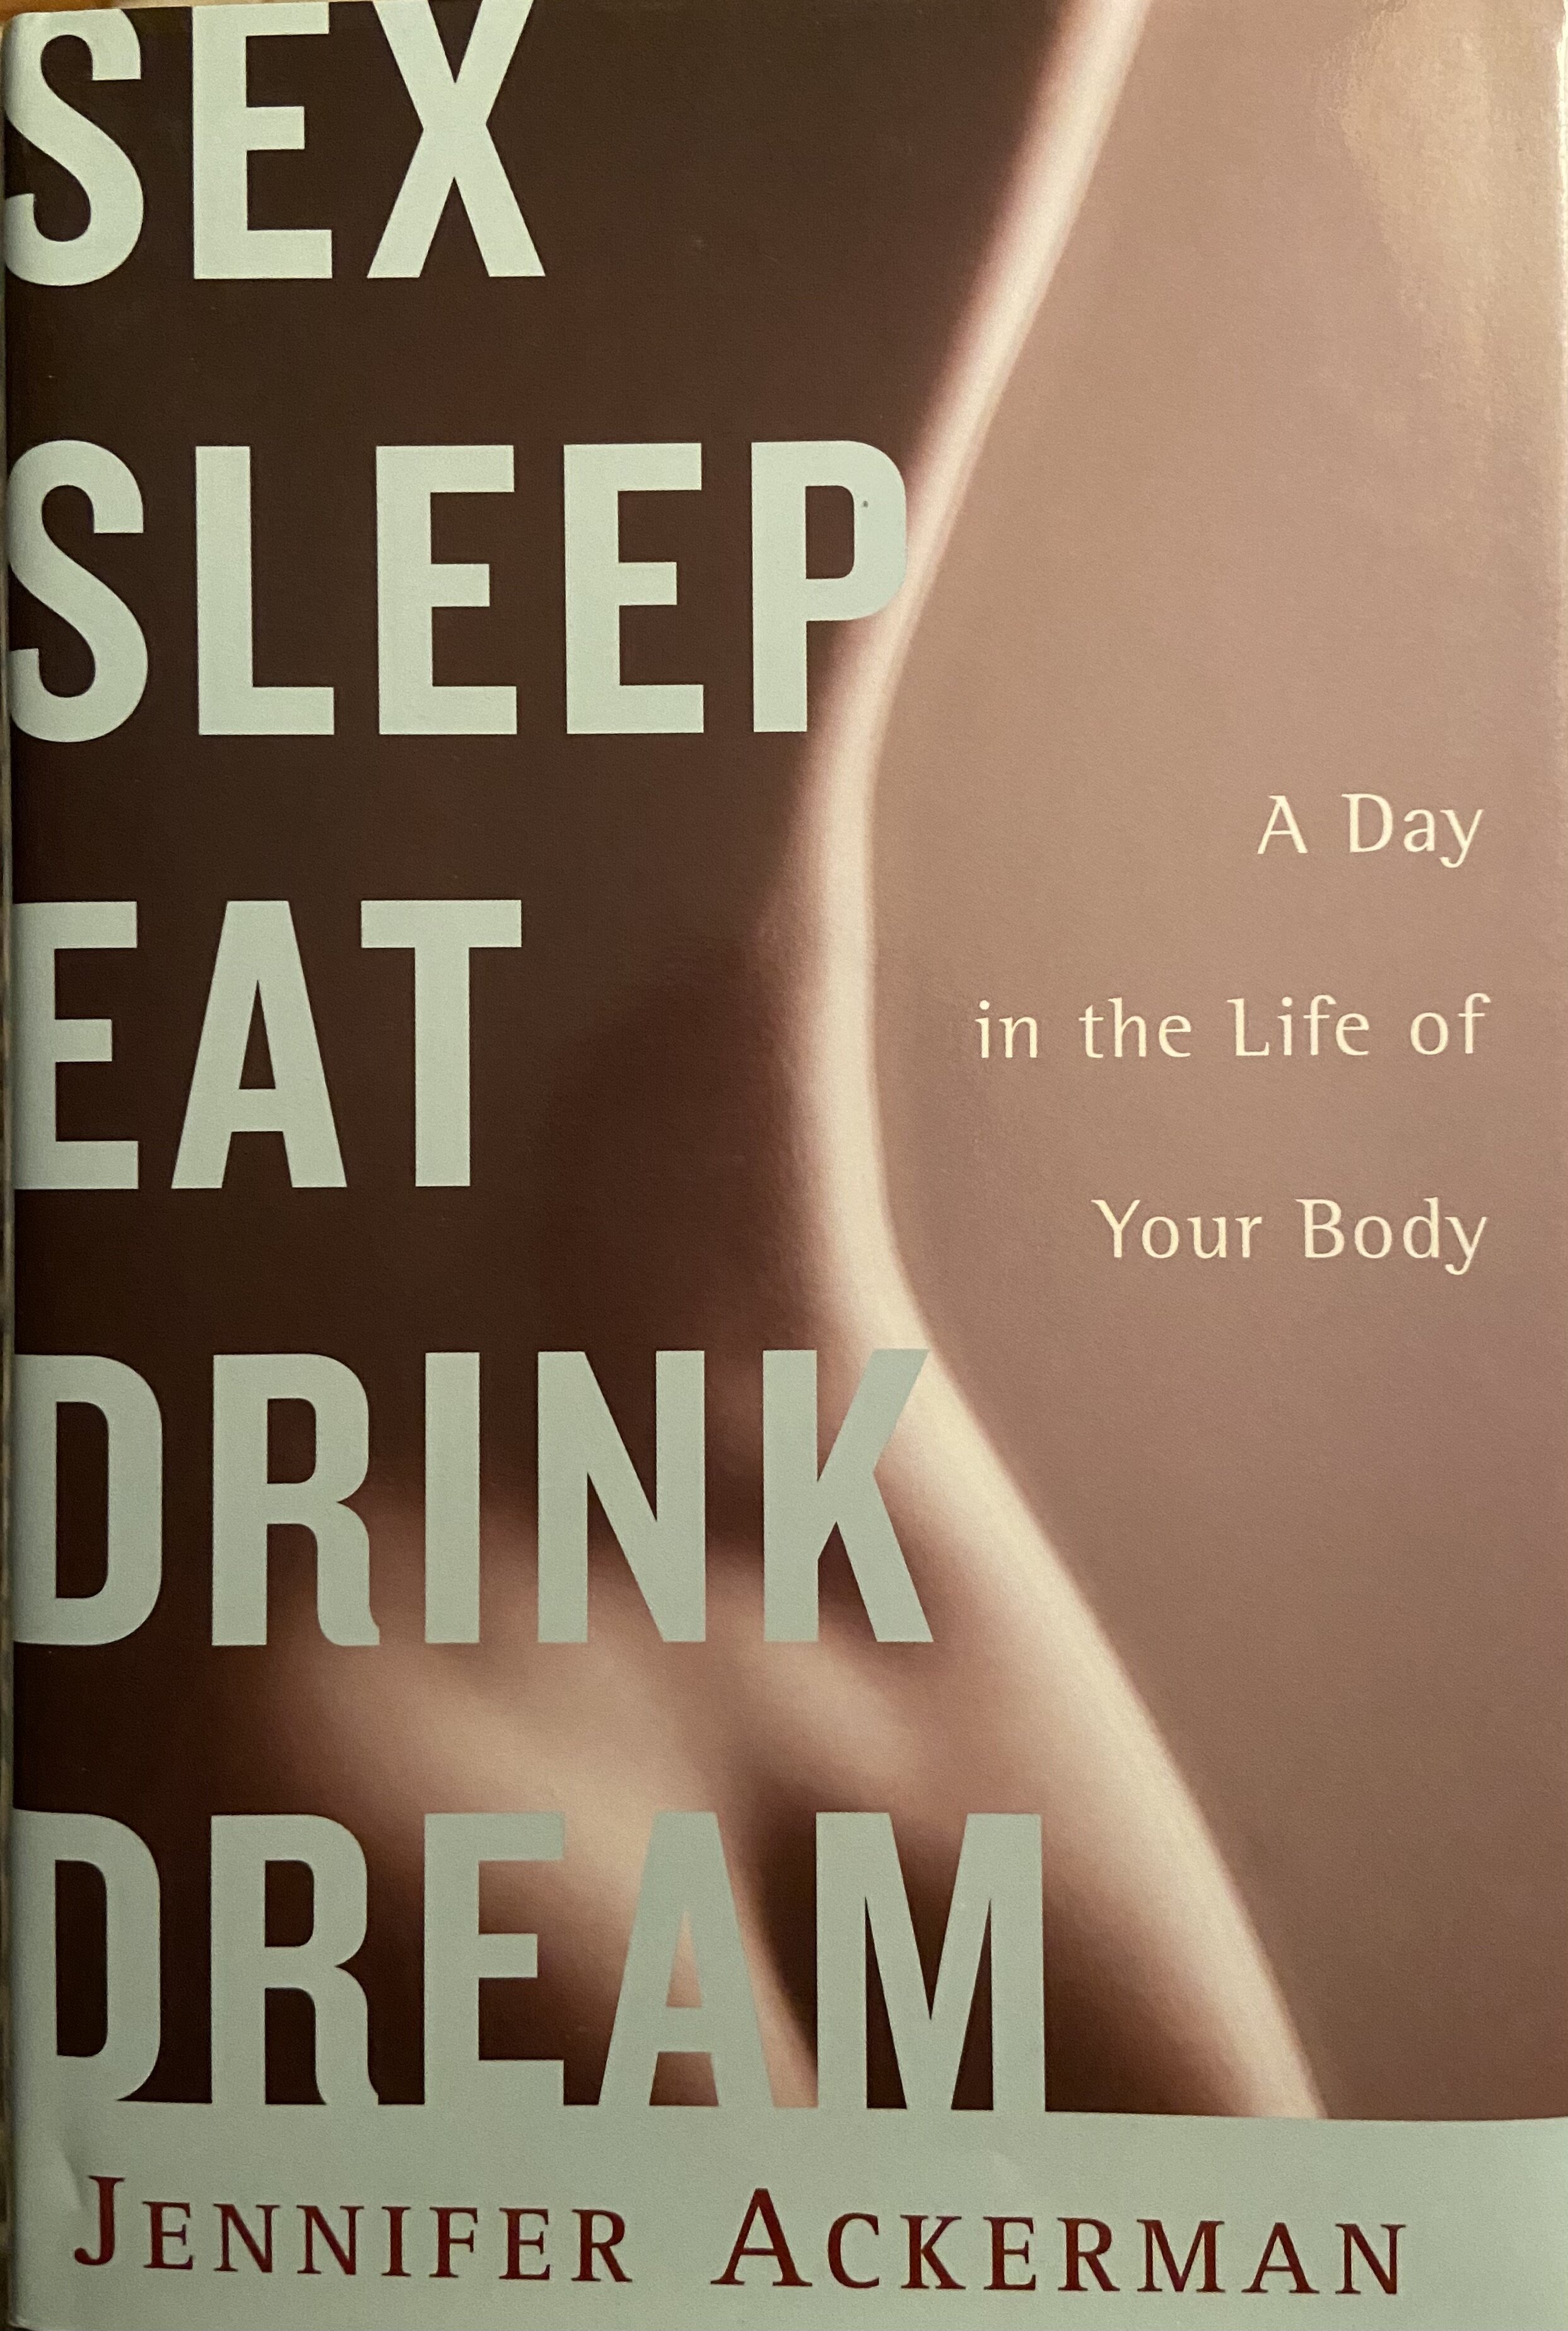 Sex, Sleep, Eat, Drink, Dream A Day in the Life of Your Body — Jennifer Ackerman